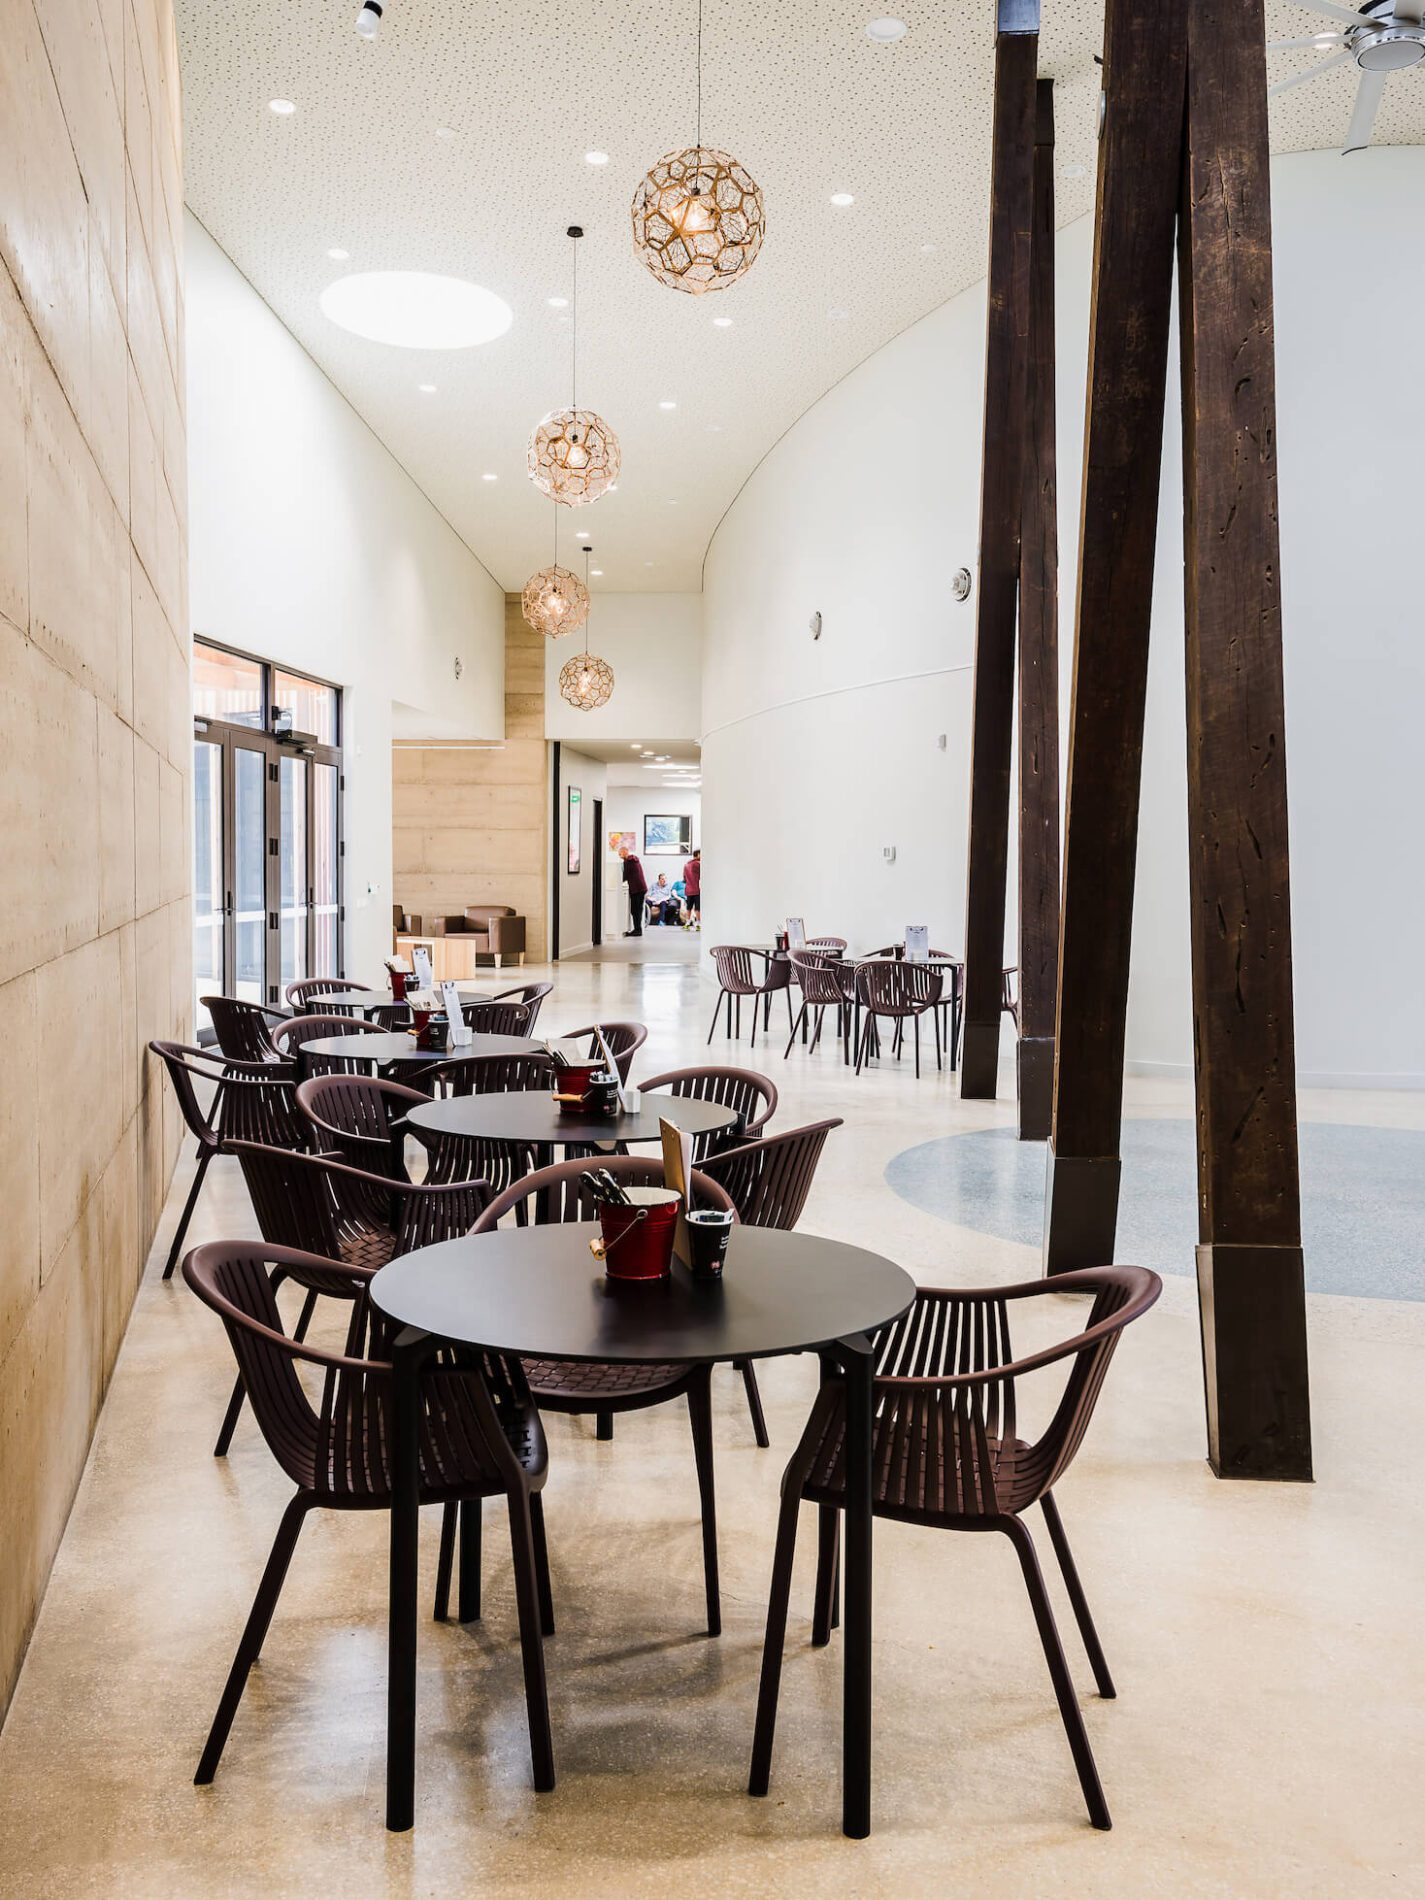 Interior image of café seating in high ceiling atrium space with feature timber structural columns